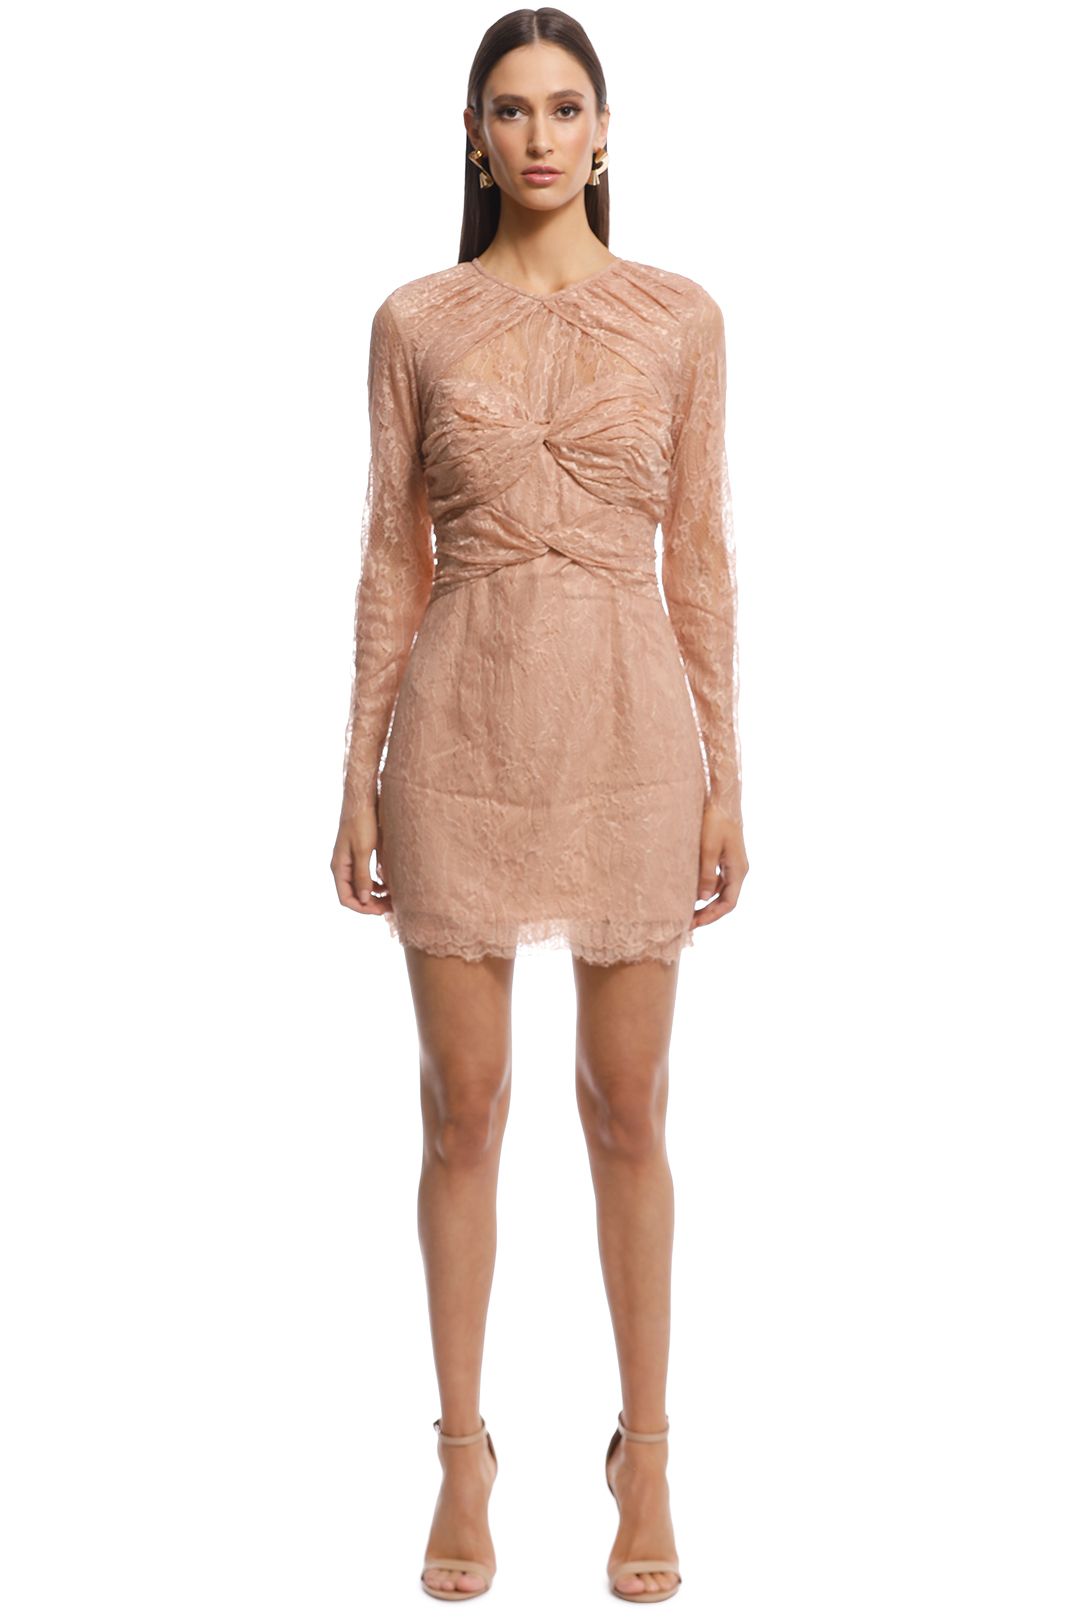 Alice McCall - Not Your Girl Dress - Blush - Front